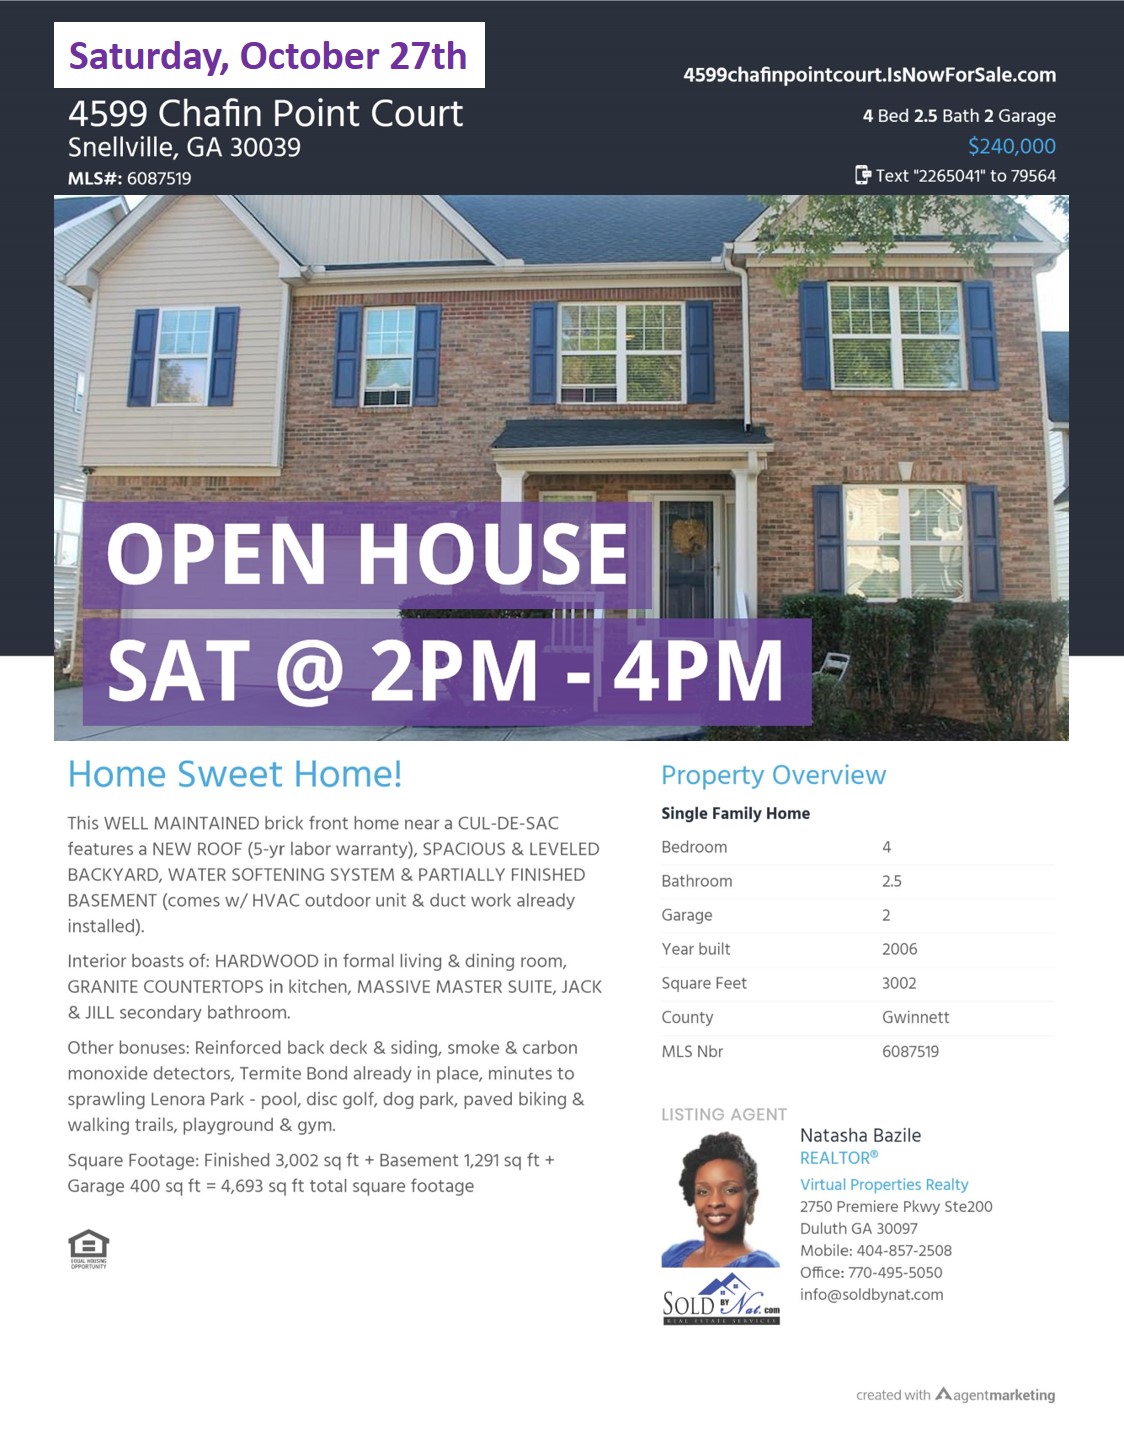 OPEN HOUSE – 4599 Chafin Point Ct. Snellville, GA – 10/27/18 2-4 pm